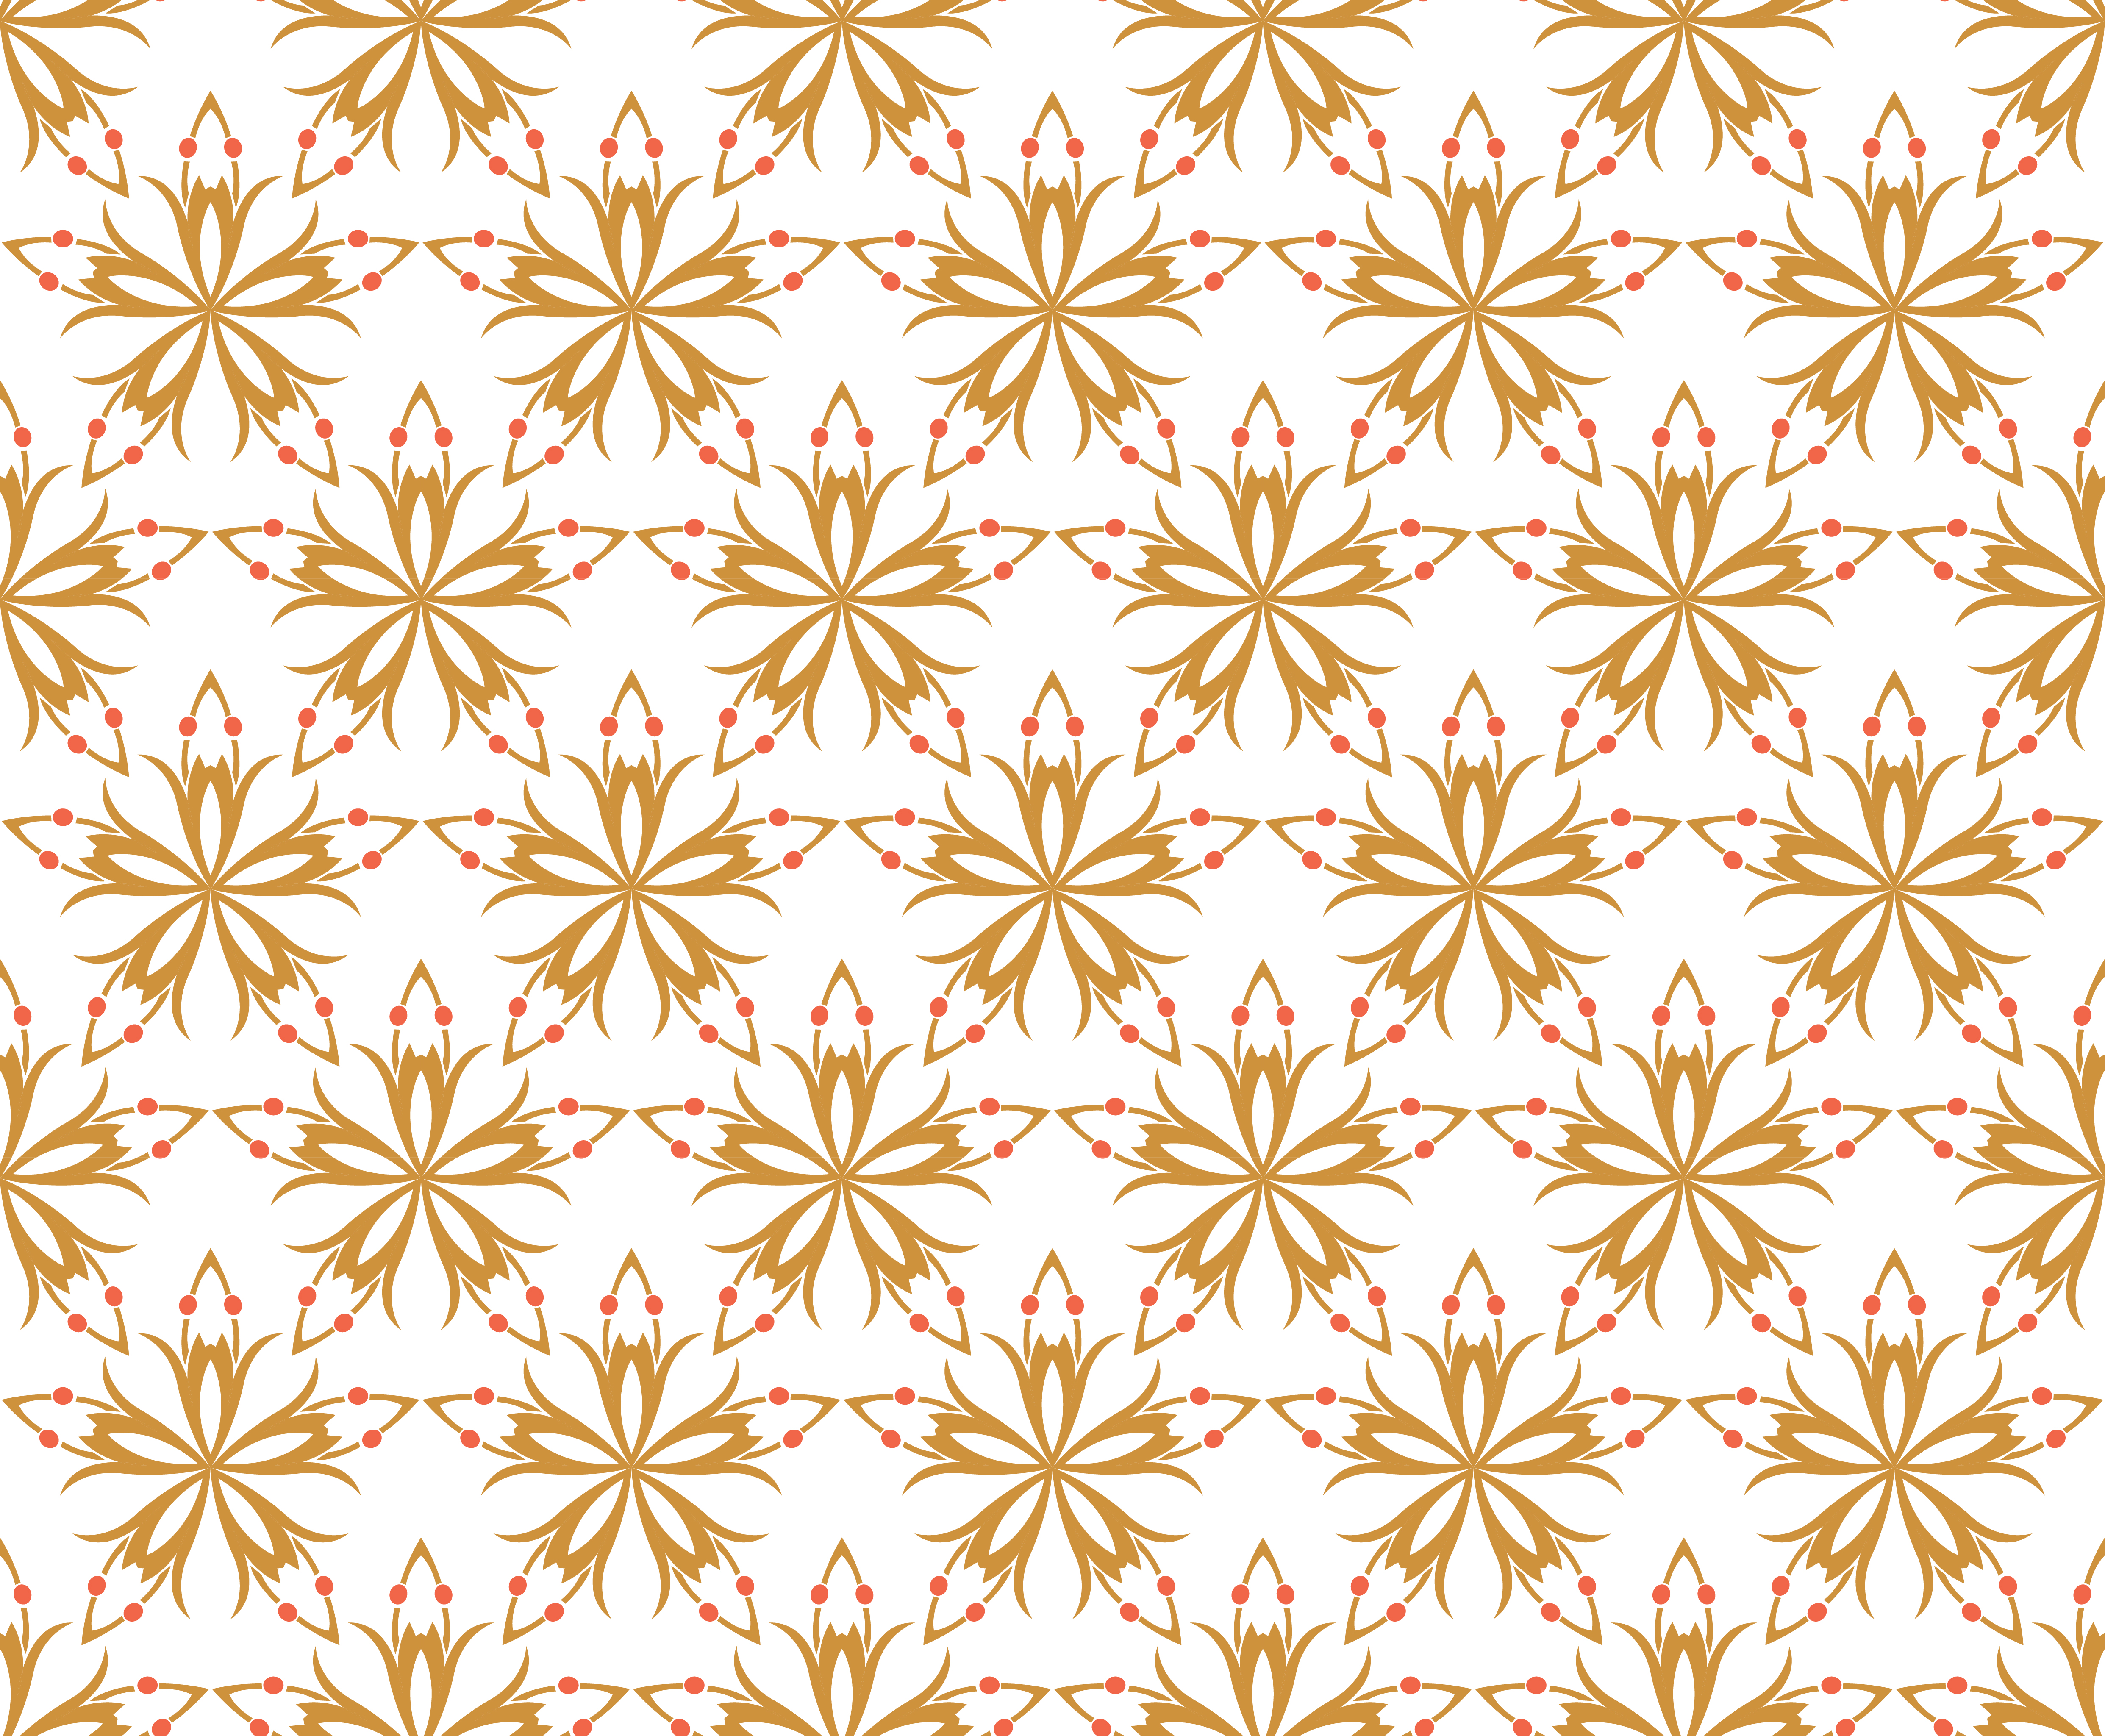 Download geometric flower floral seamless pattern background 591898 - Download Free Vectors, Clipart ...